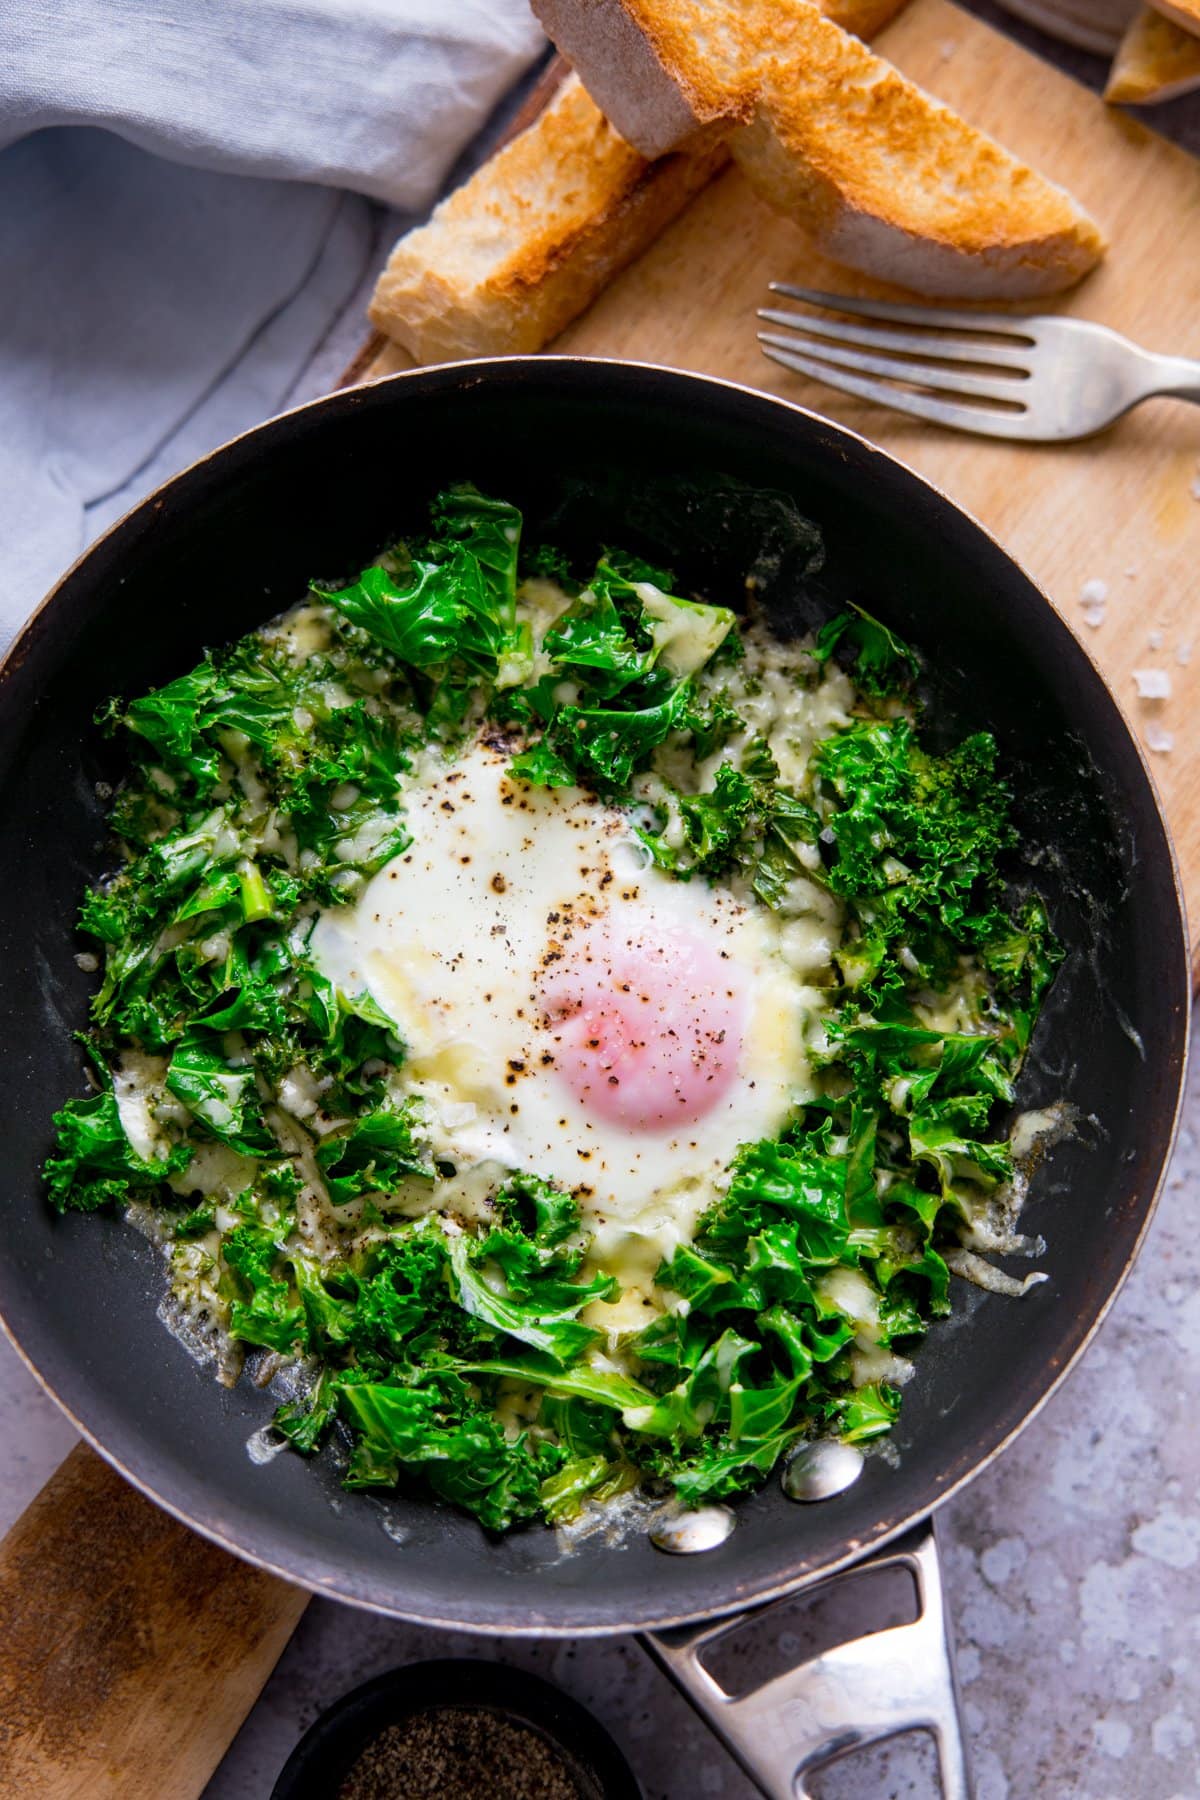 Fried egg in a pan with kale and cheese. Pan is on a wooden board with toast soldiers at the top of the shot.